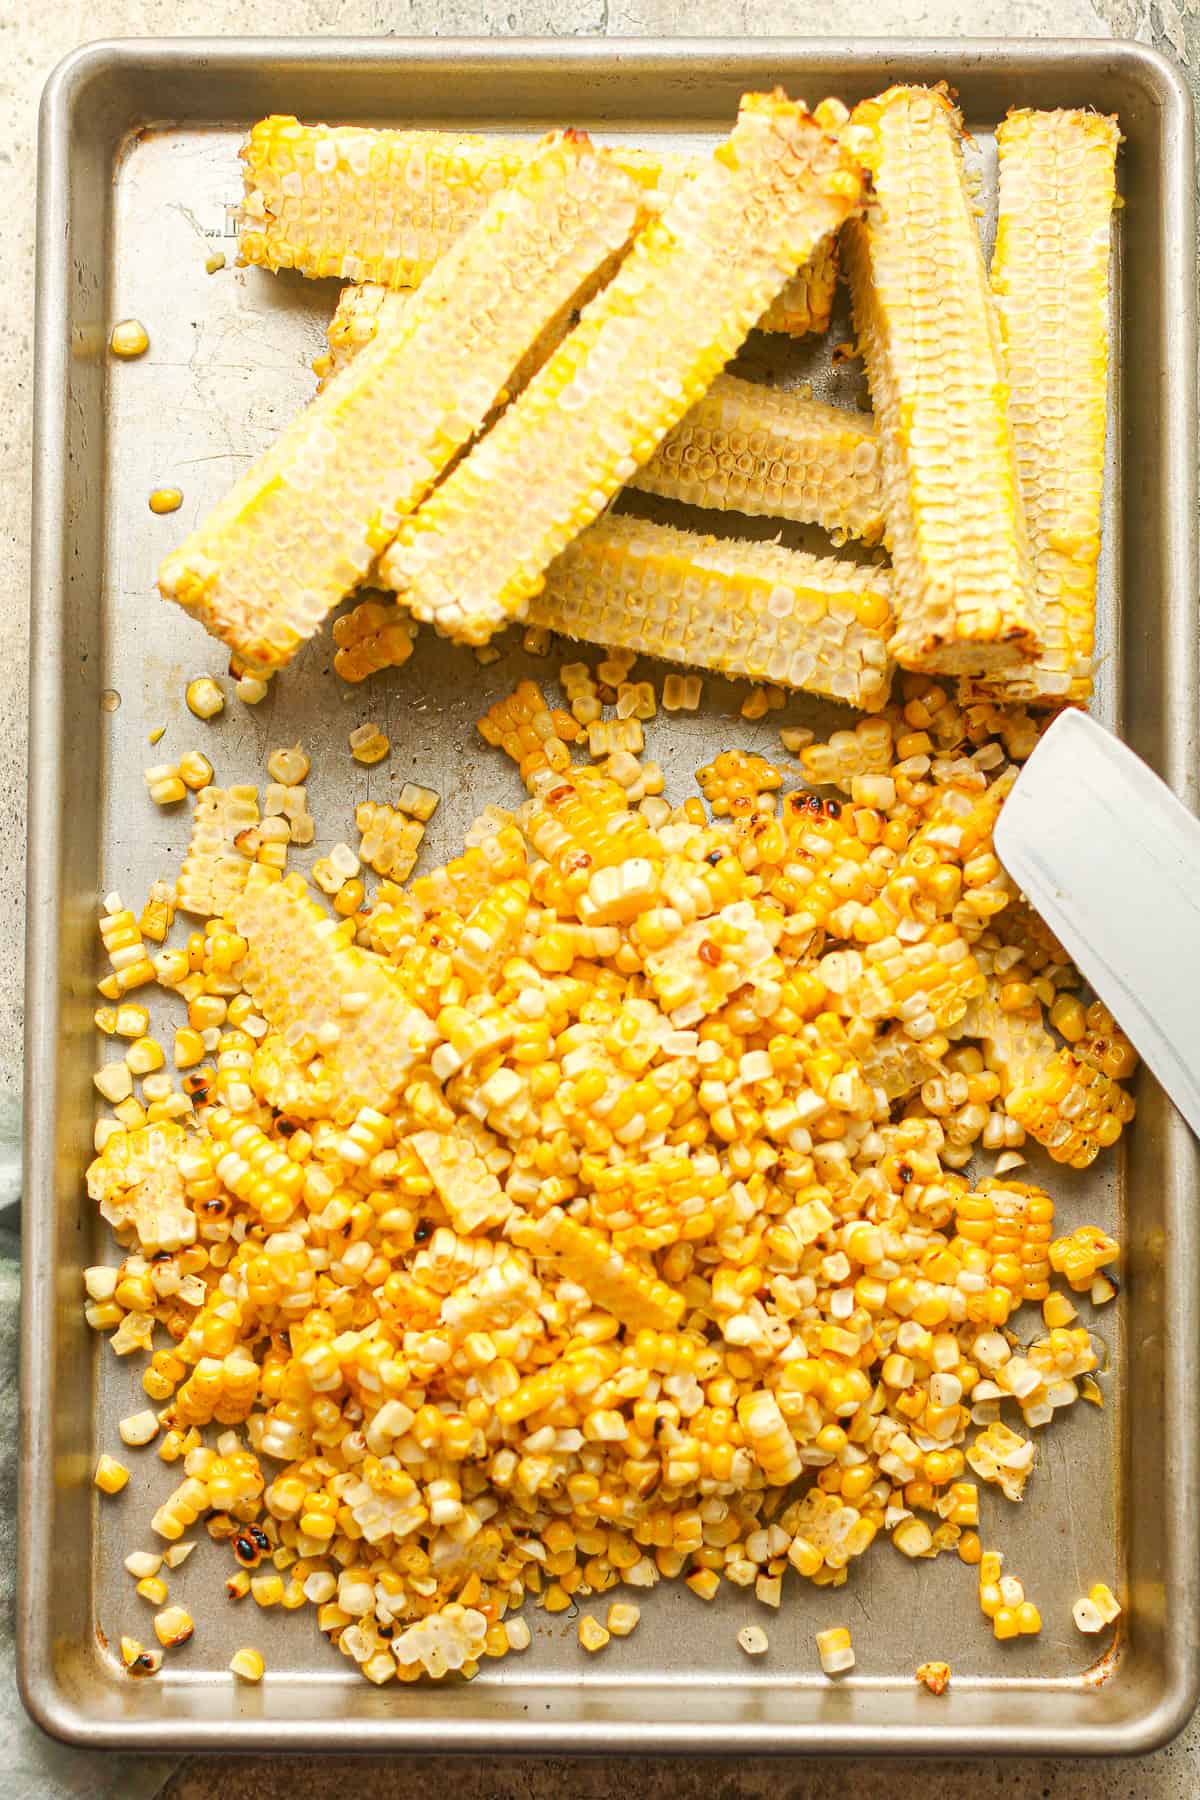 A pan of corn cobs and corn kernels sliced off the cobs.